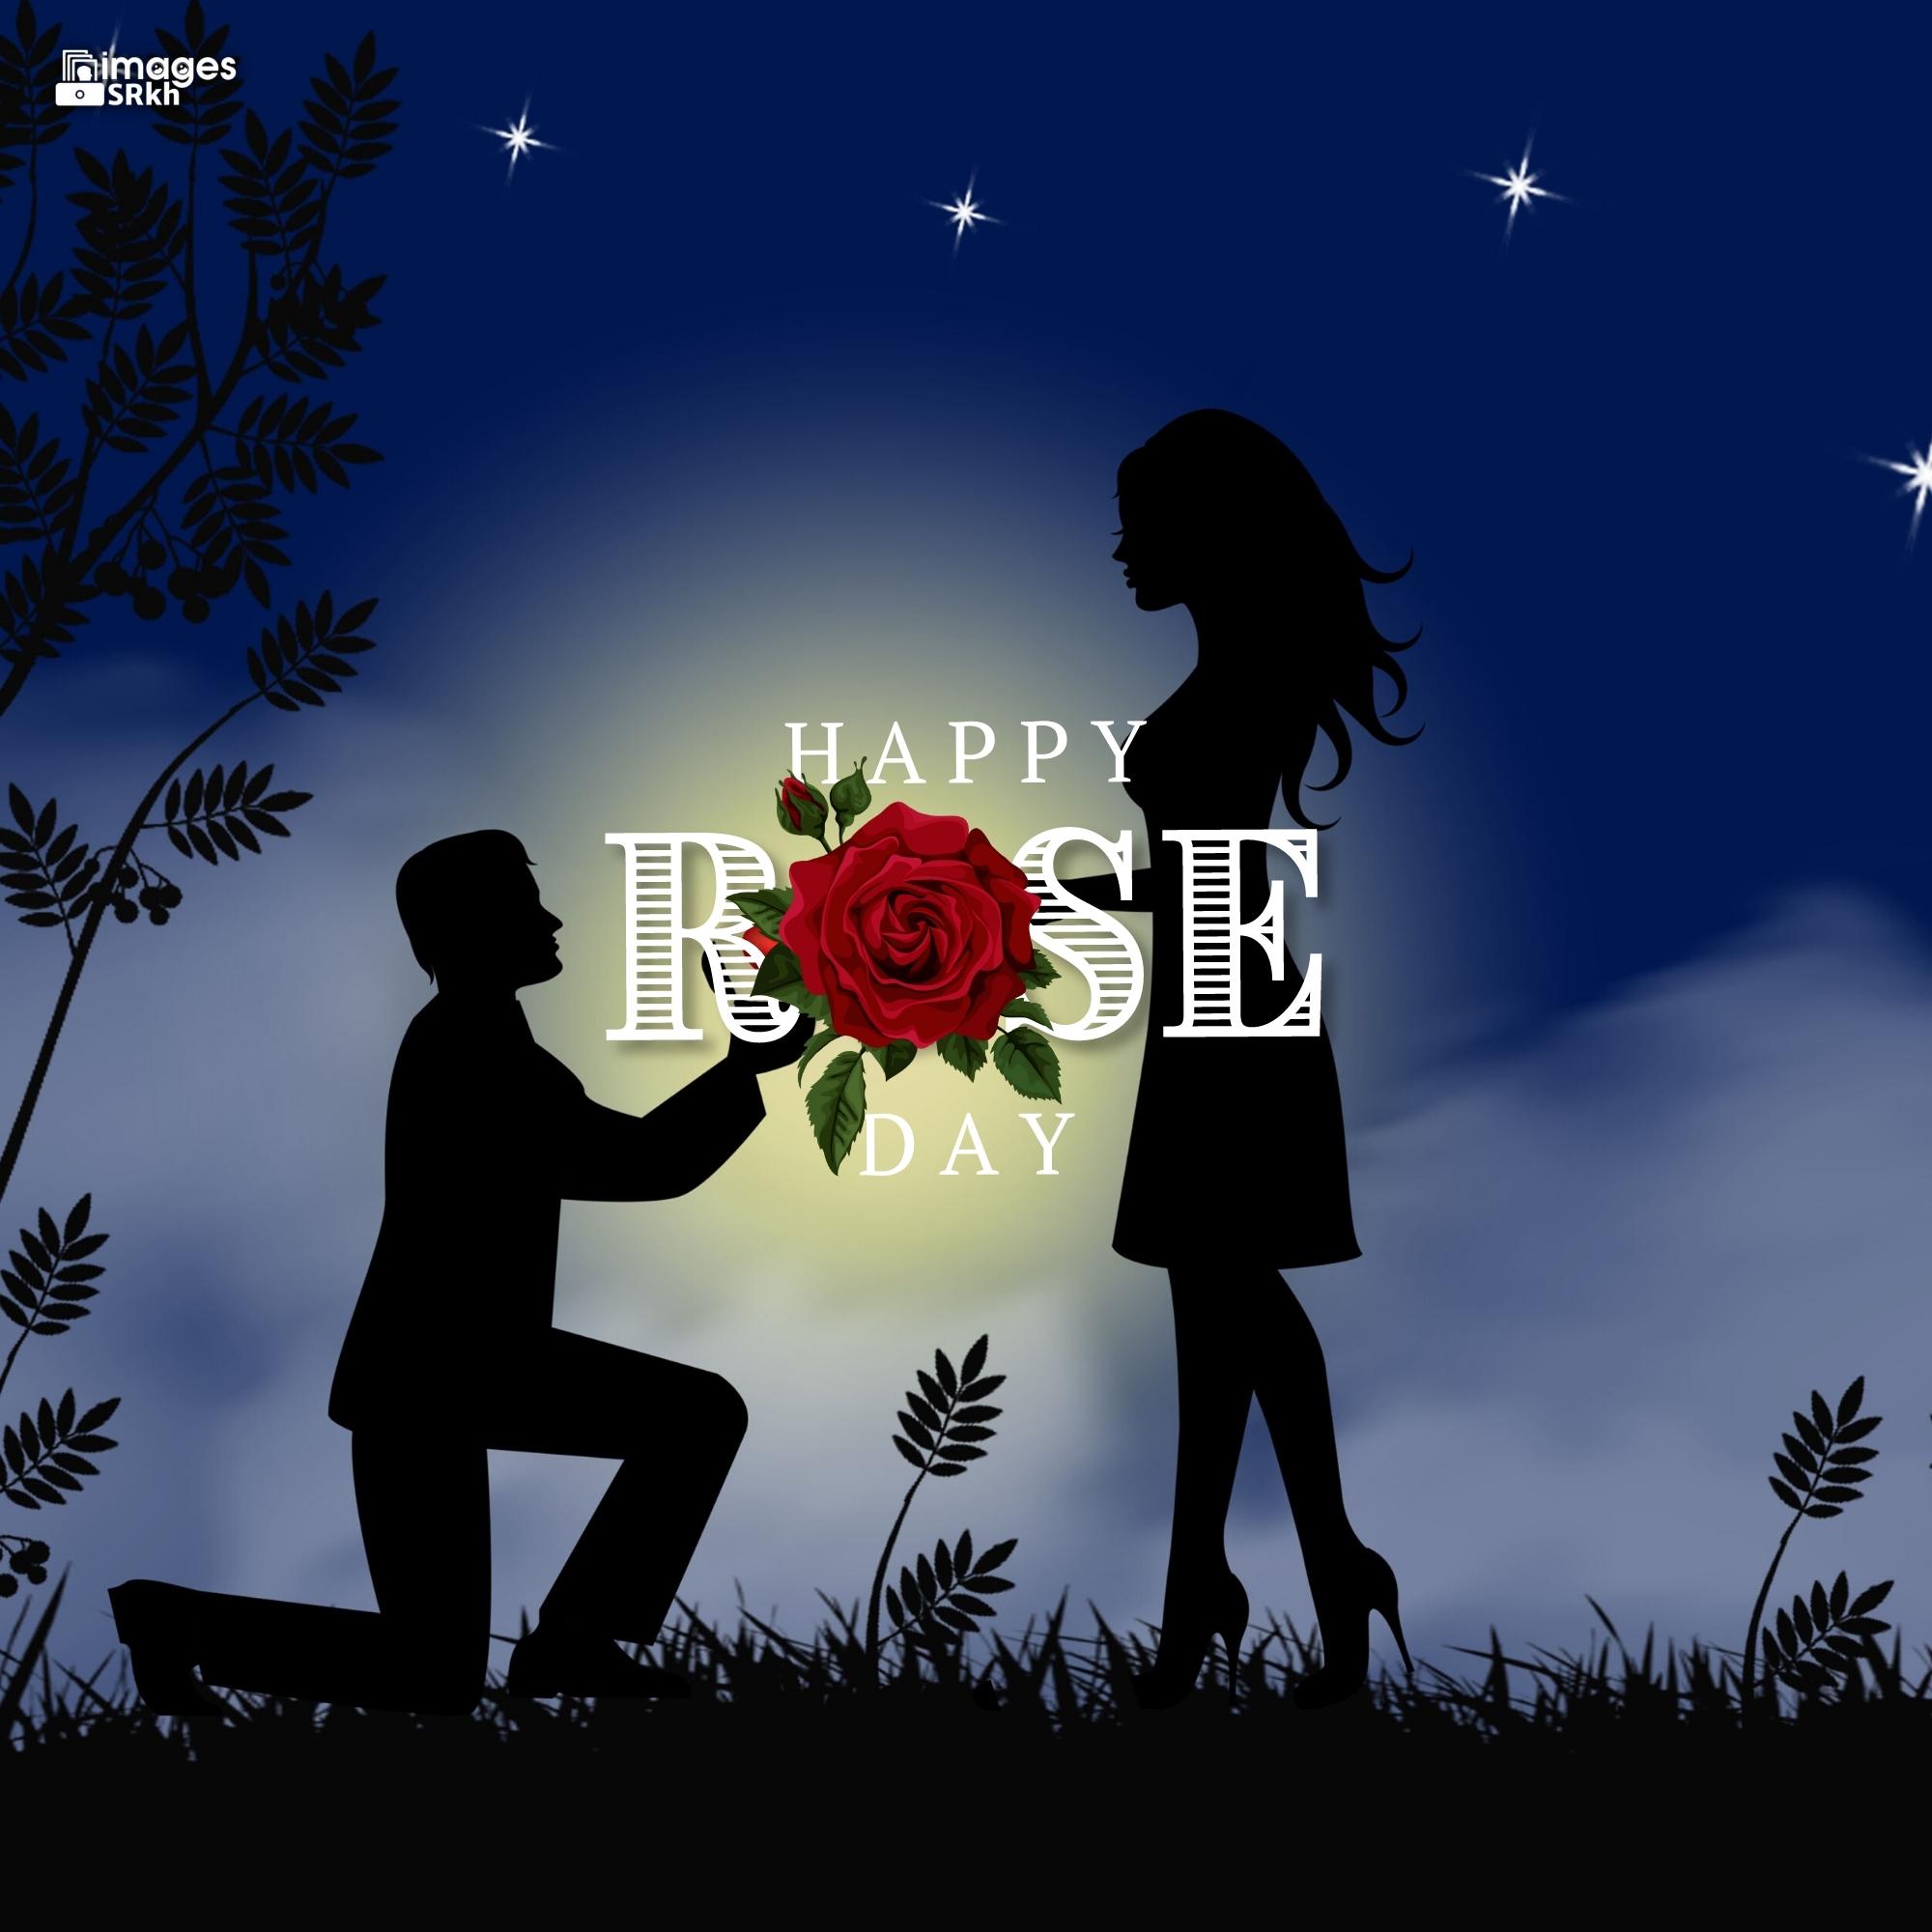 Romantic Rose Day Images Hd Download (23)